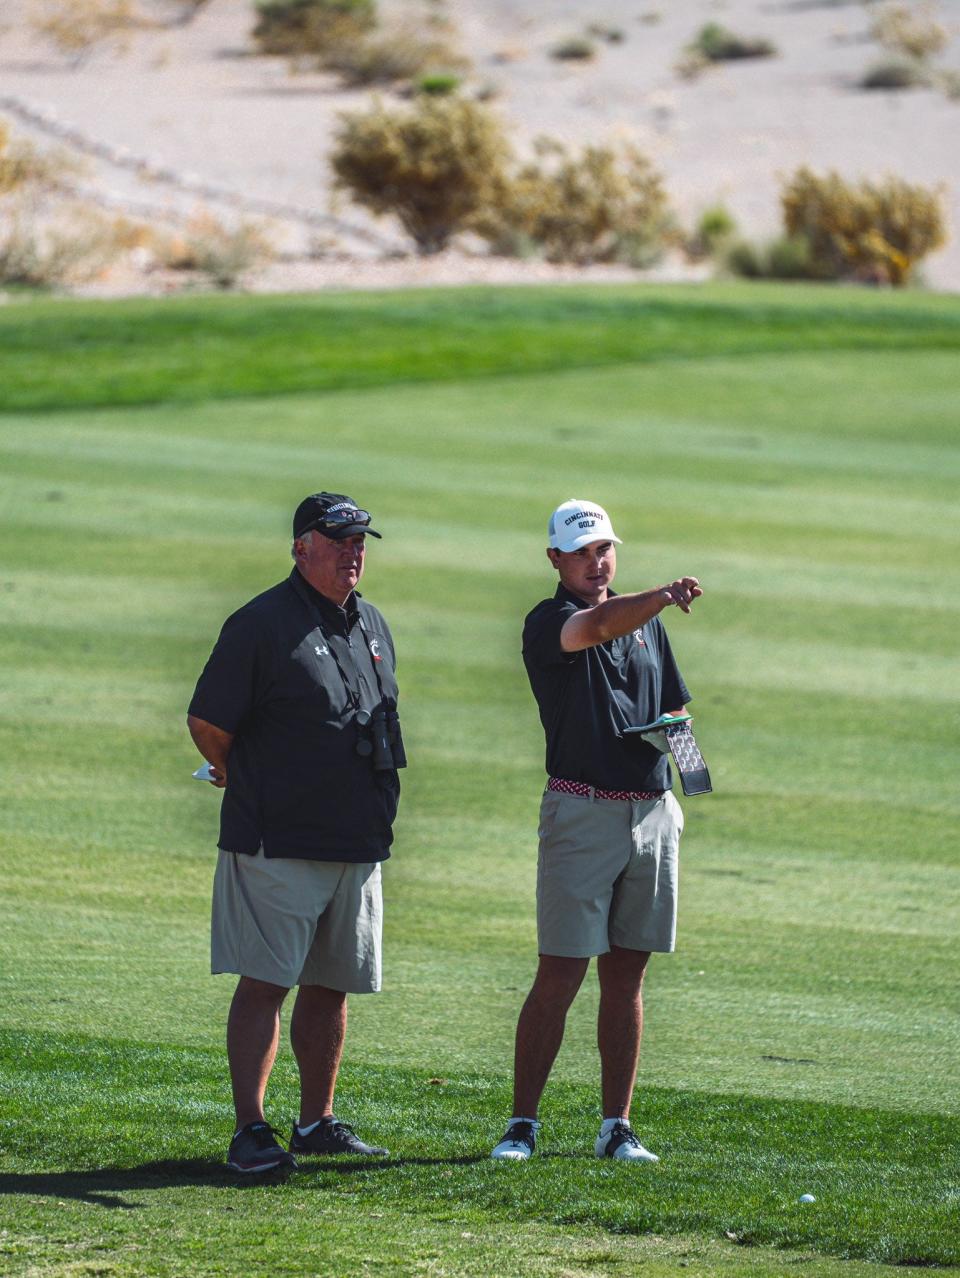 UC coach Doug Martin helps Ty Gingerich line up a shot. Gingerich is playing in an NCAA regional for the Bearcats for a second straight year.